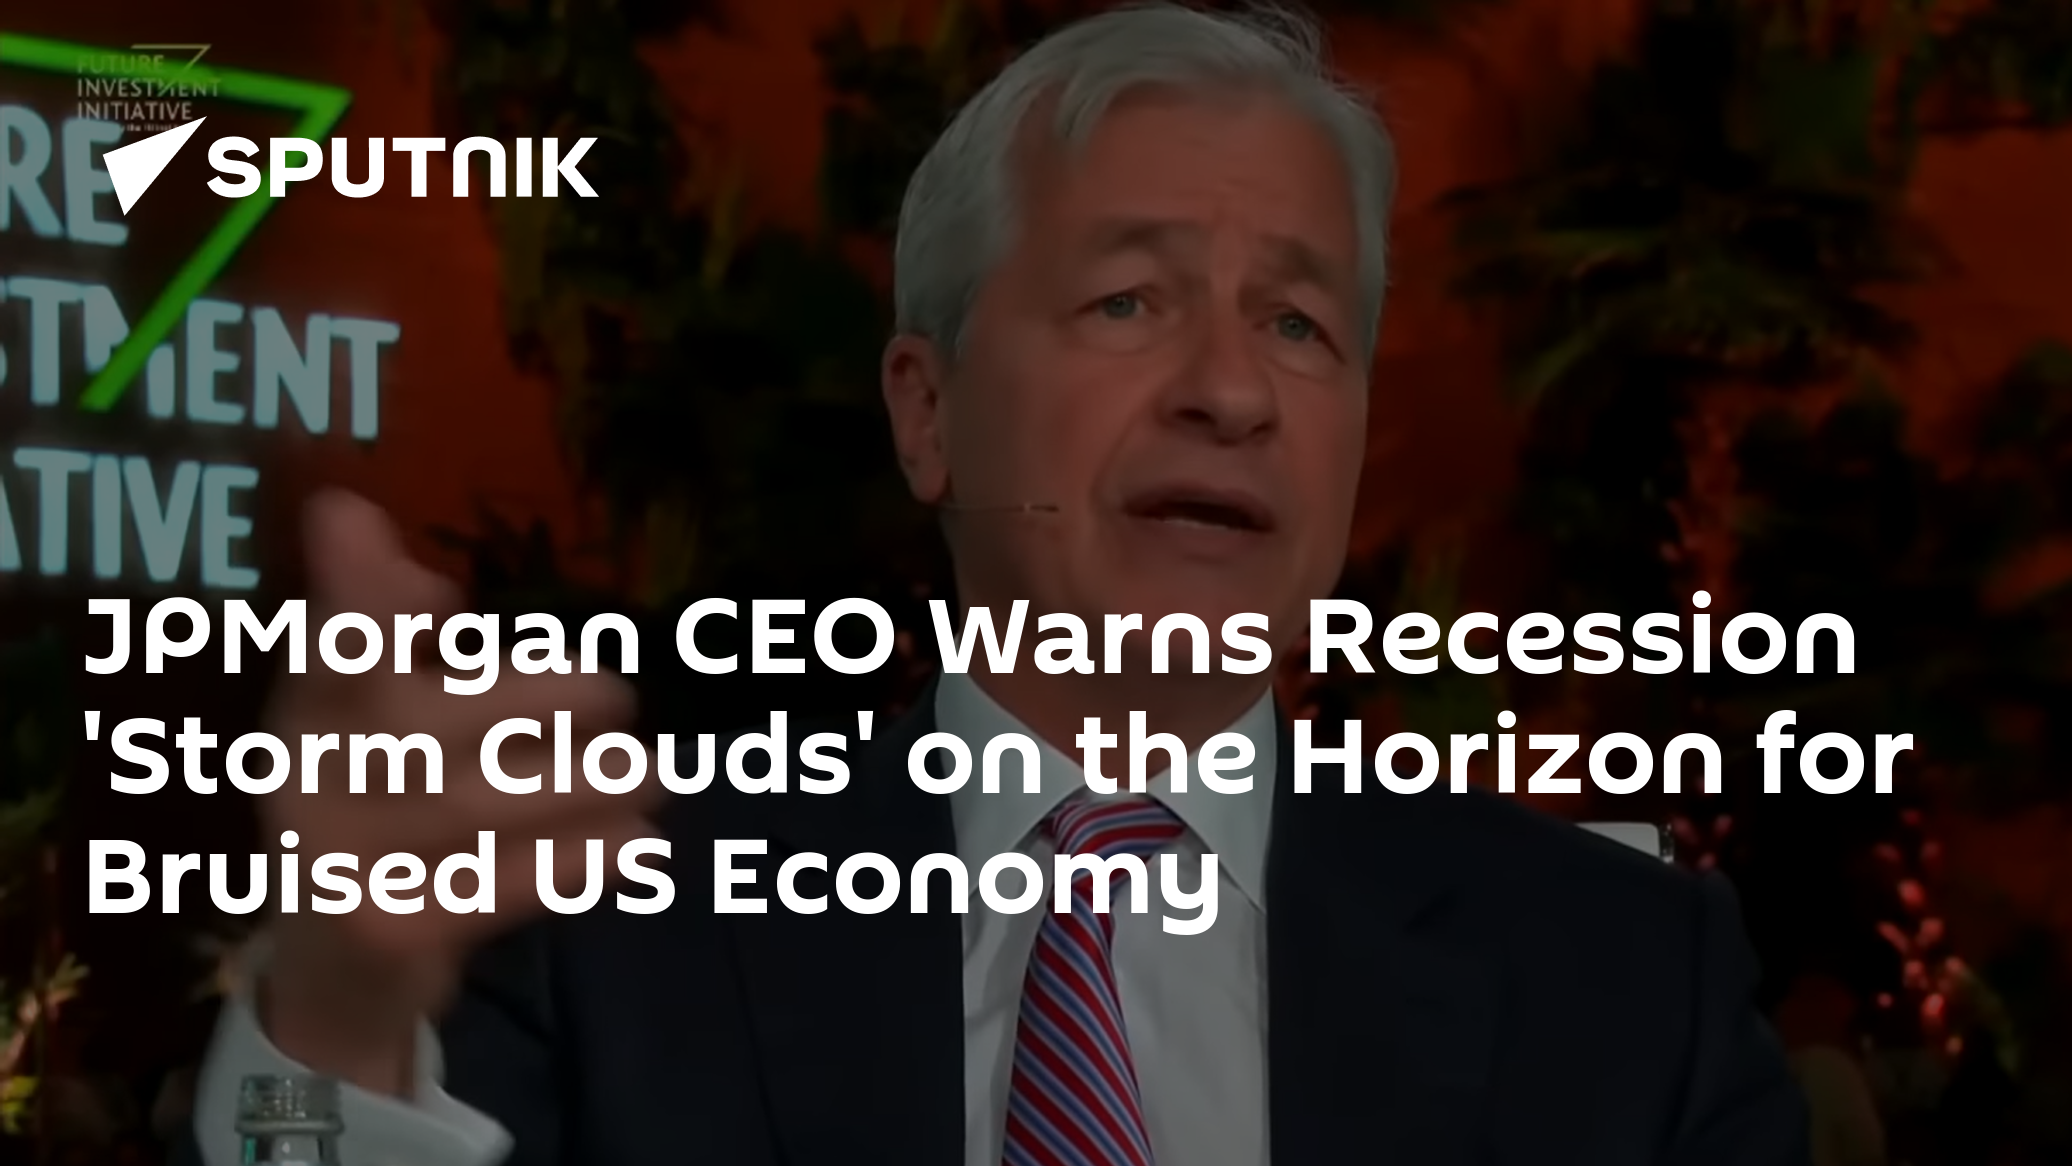 CEO Warns 'Storm Clouds' on Horizon for the Economy